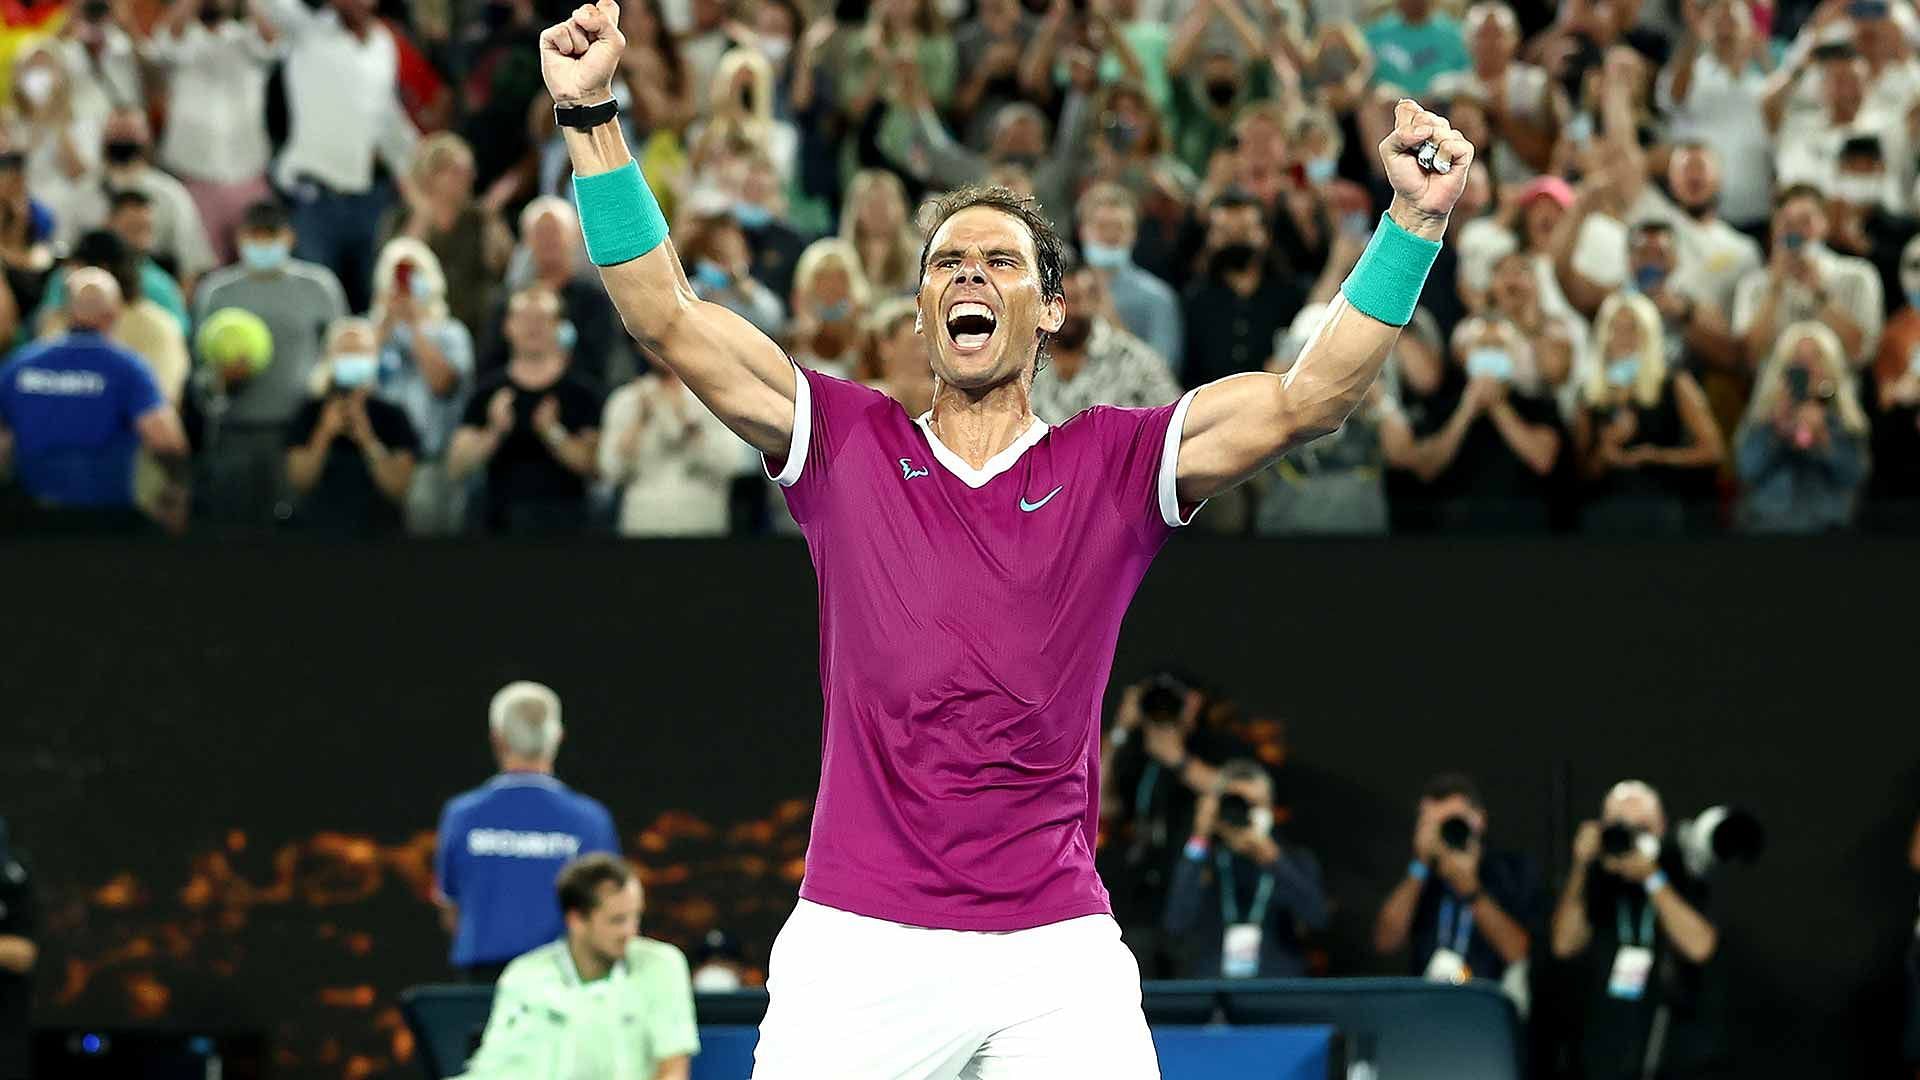 The Spaniard celebrates victory at the 2022 Australian Open final